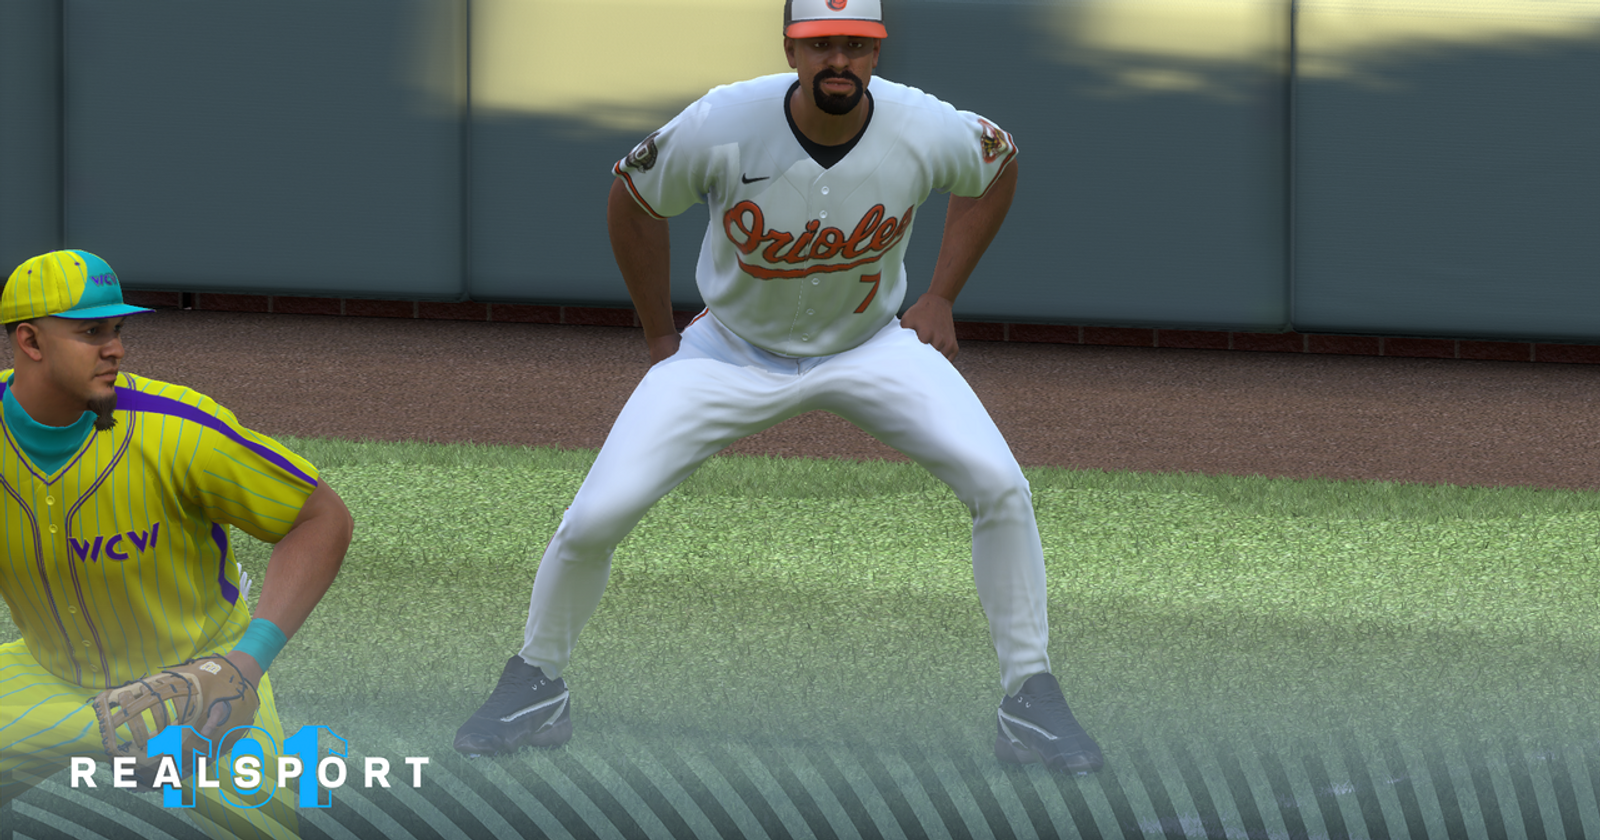 MLB The Show 22 Update 1.10 Patch Notes arrive just before Sizzling Summer  (June 30)